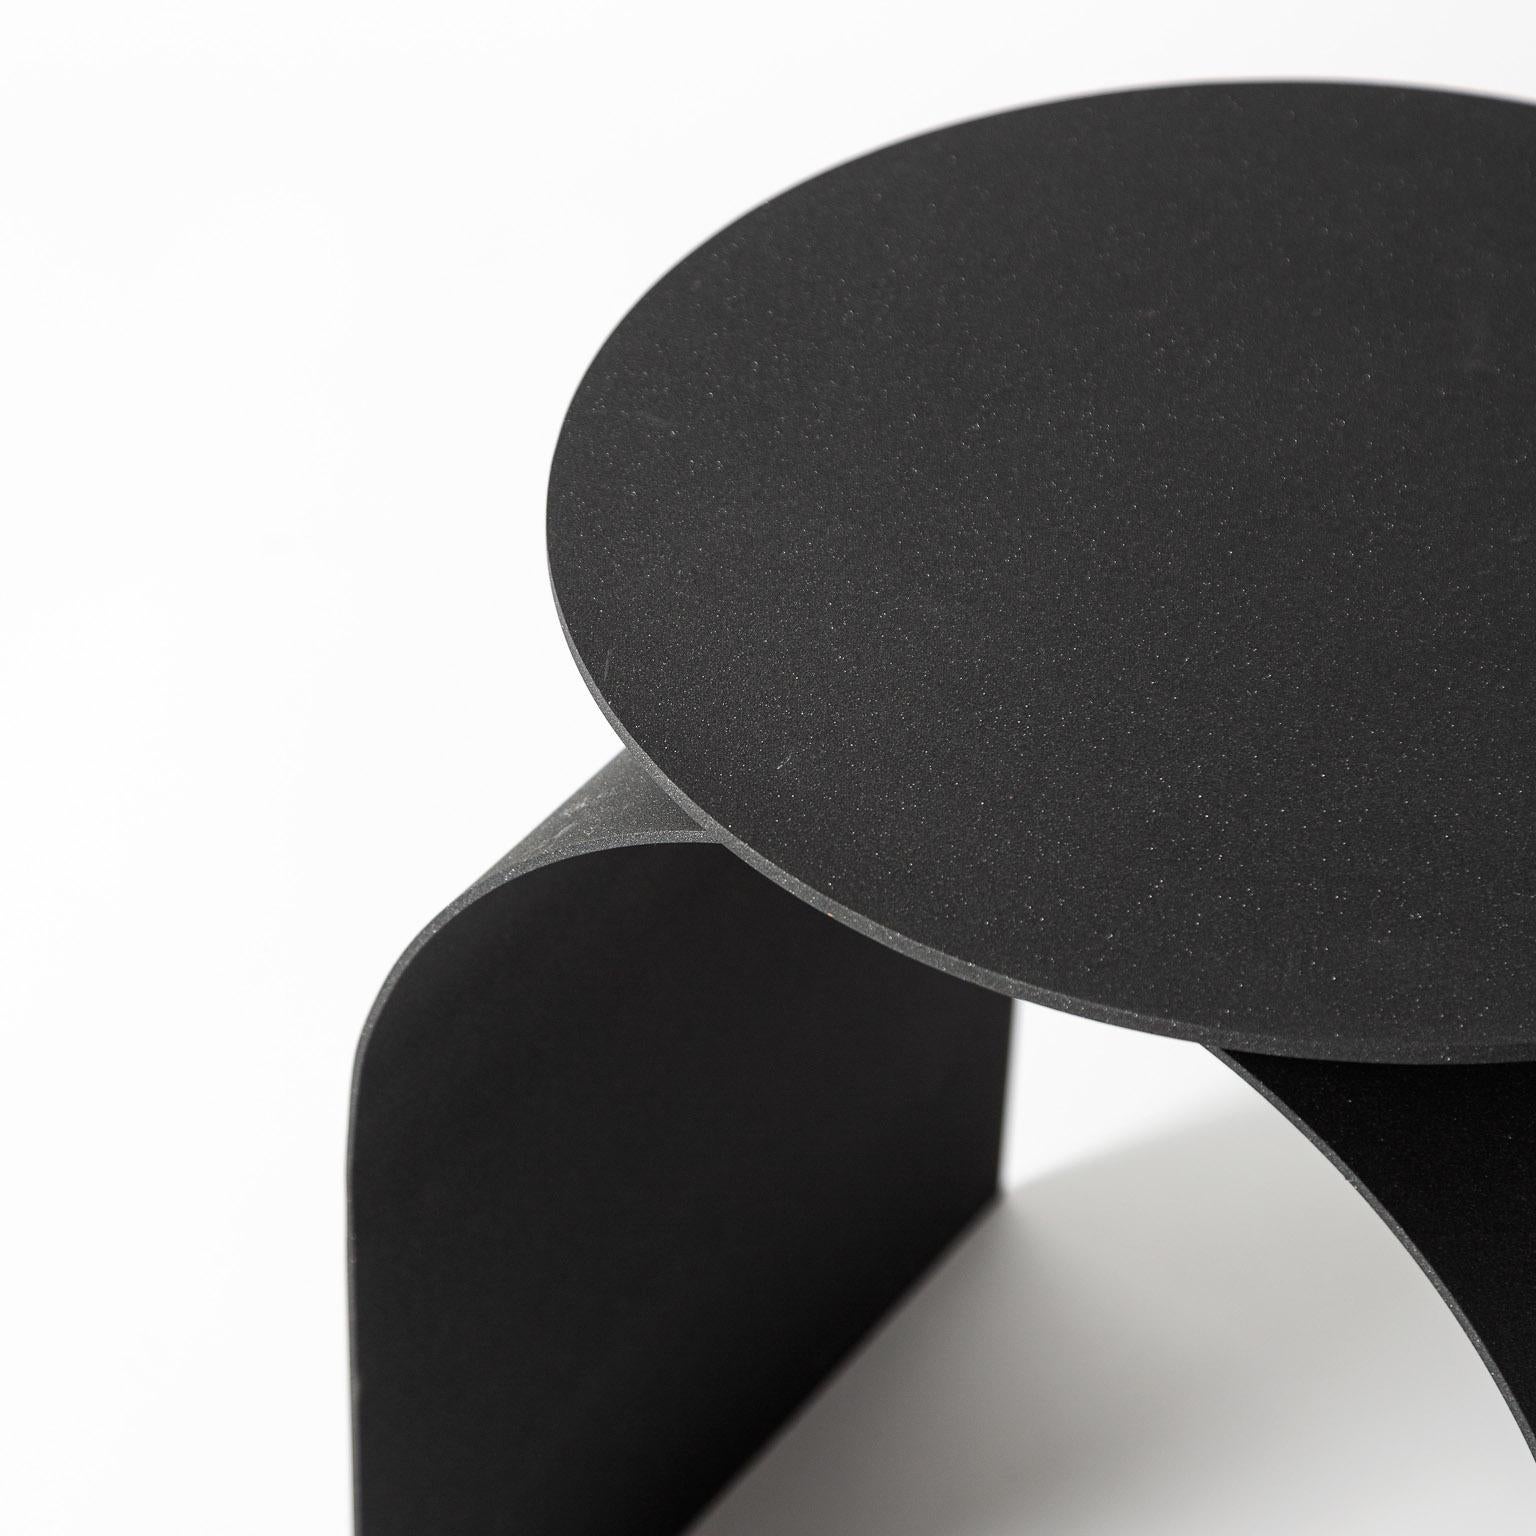 The architectural essentiality of the stools derives from the neoclassic attitude of Palladio.
A sheet of metal thin as air draws the shape of this timeless product. A disc projecting shadows on an arch is the essential gesture behind this timeless